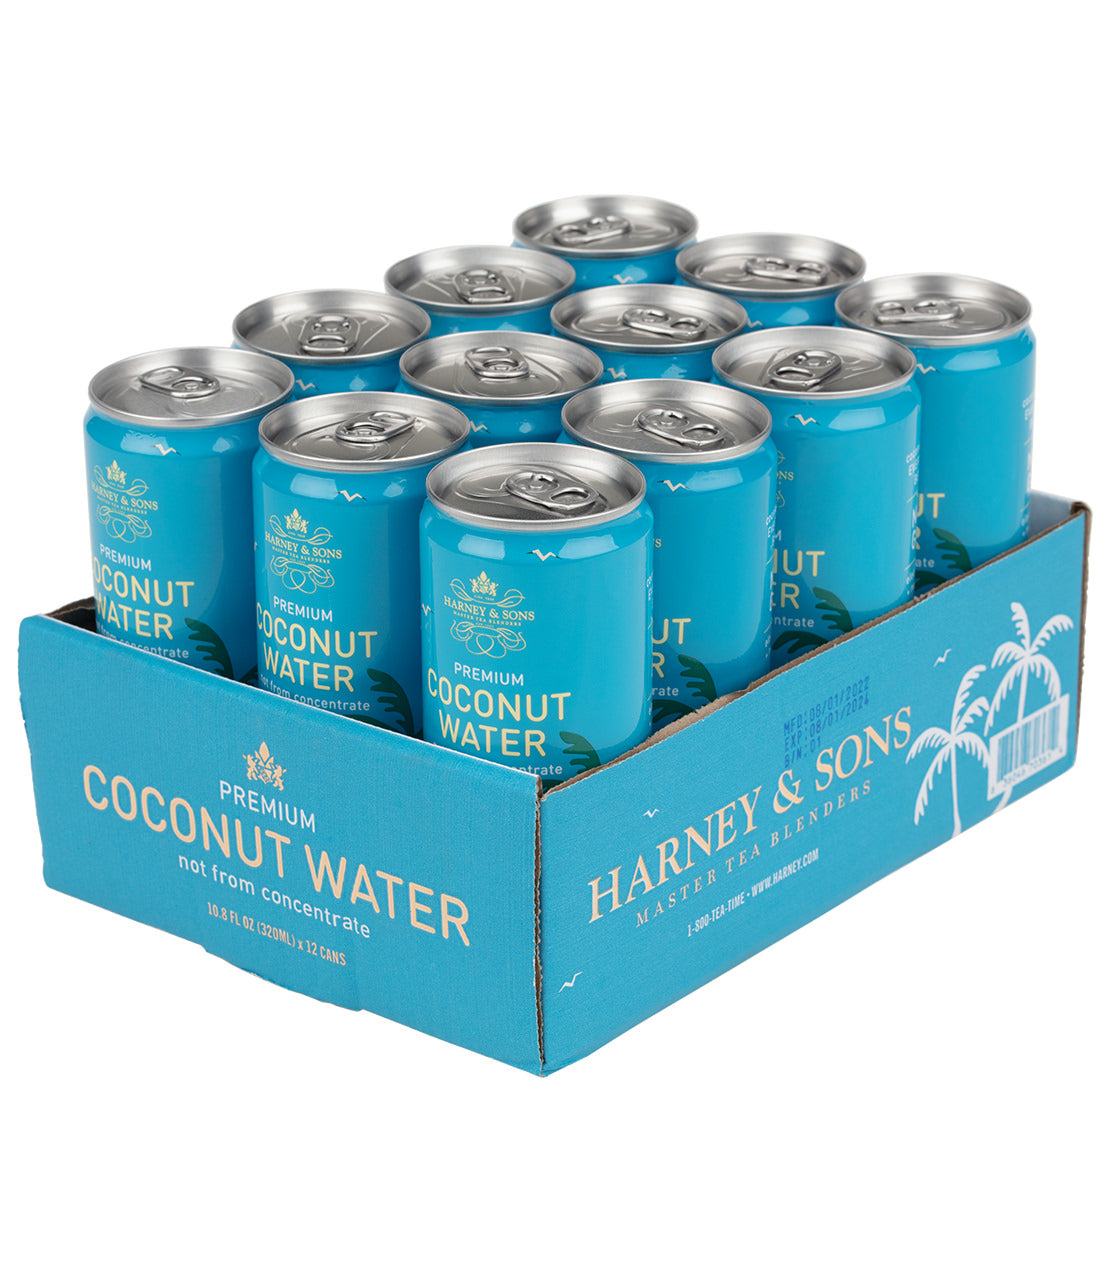 Harney & Sons Premium Coconut Water - 10.8 oz. Can Case of 12 Cans - Harney & Sons Fine Teas